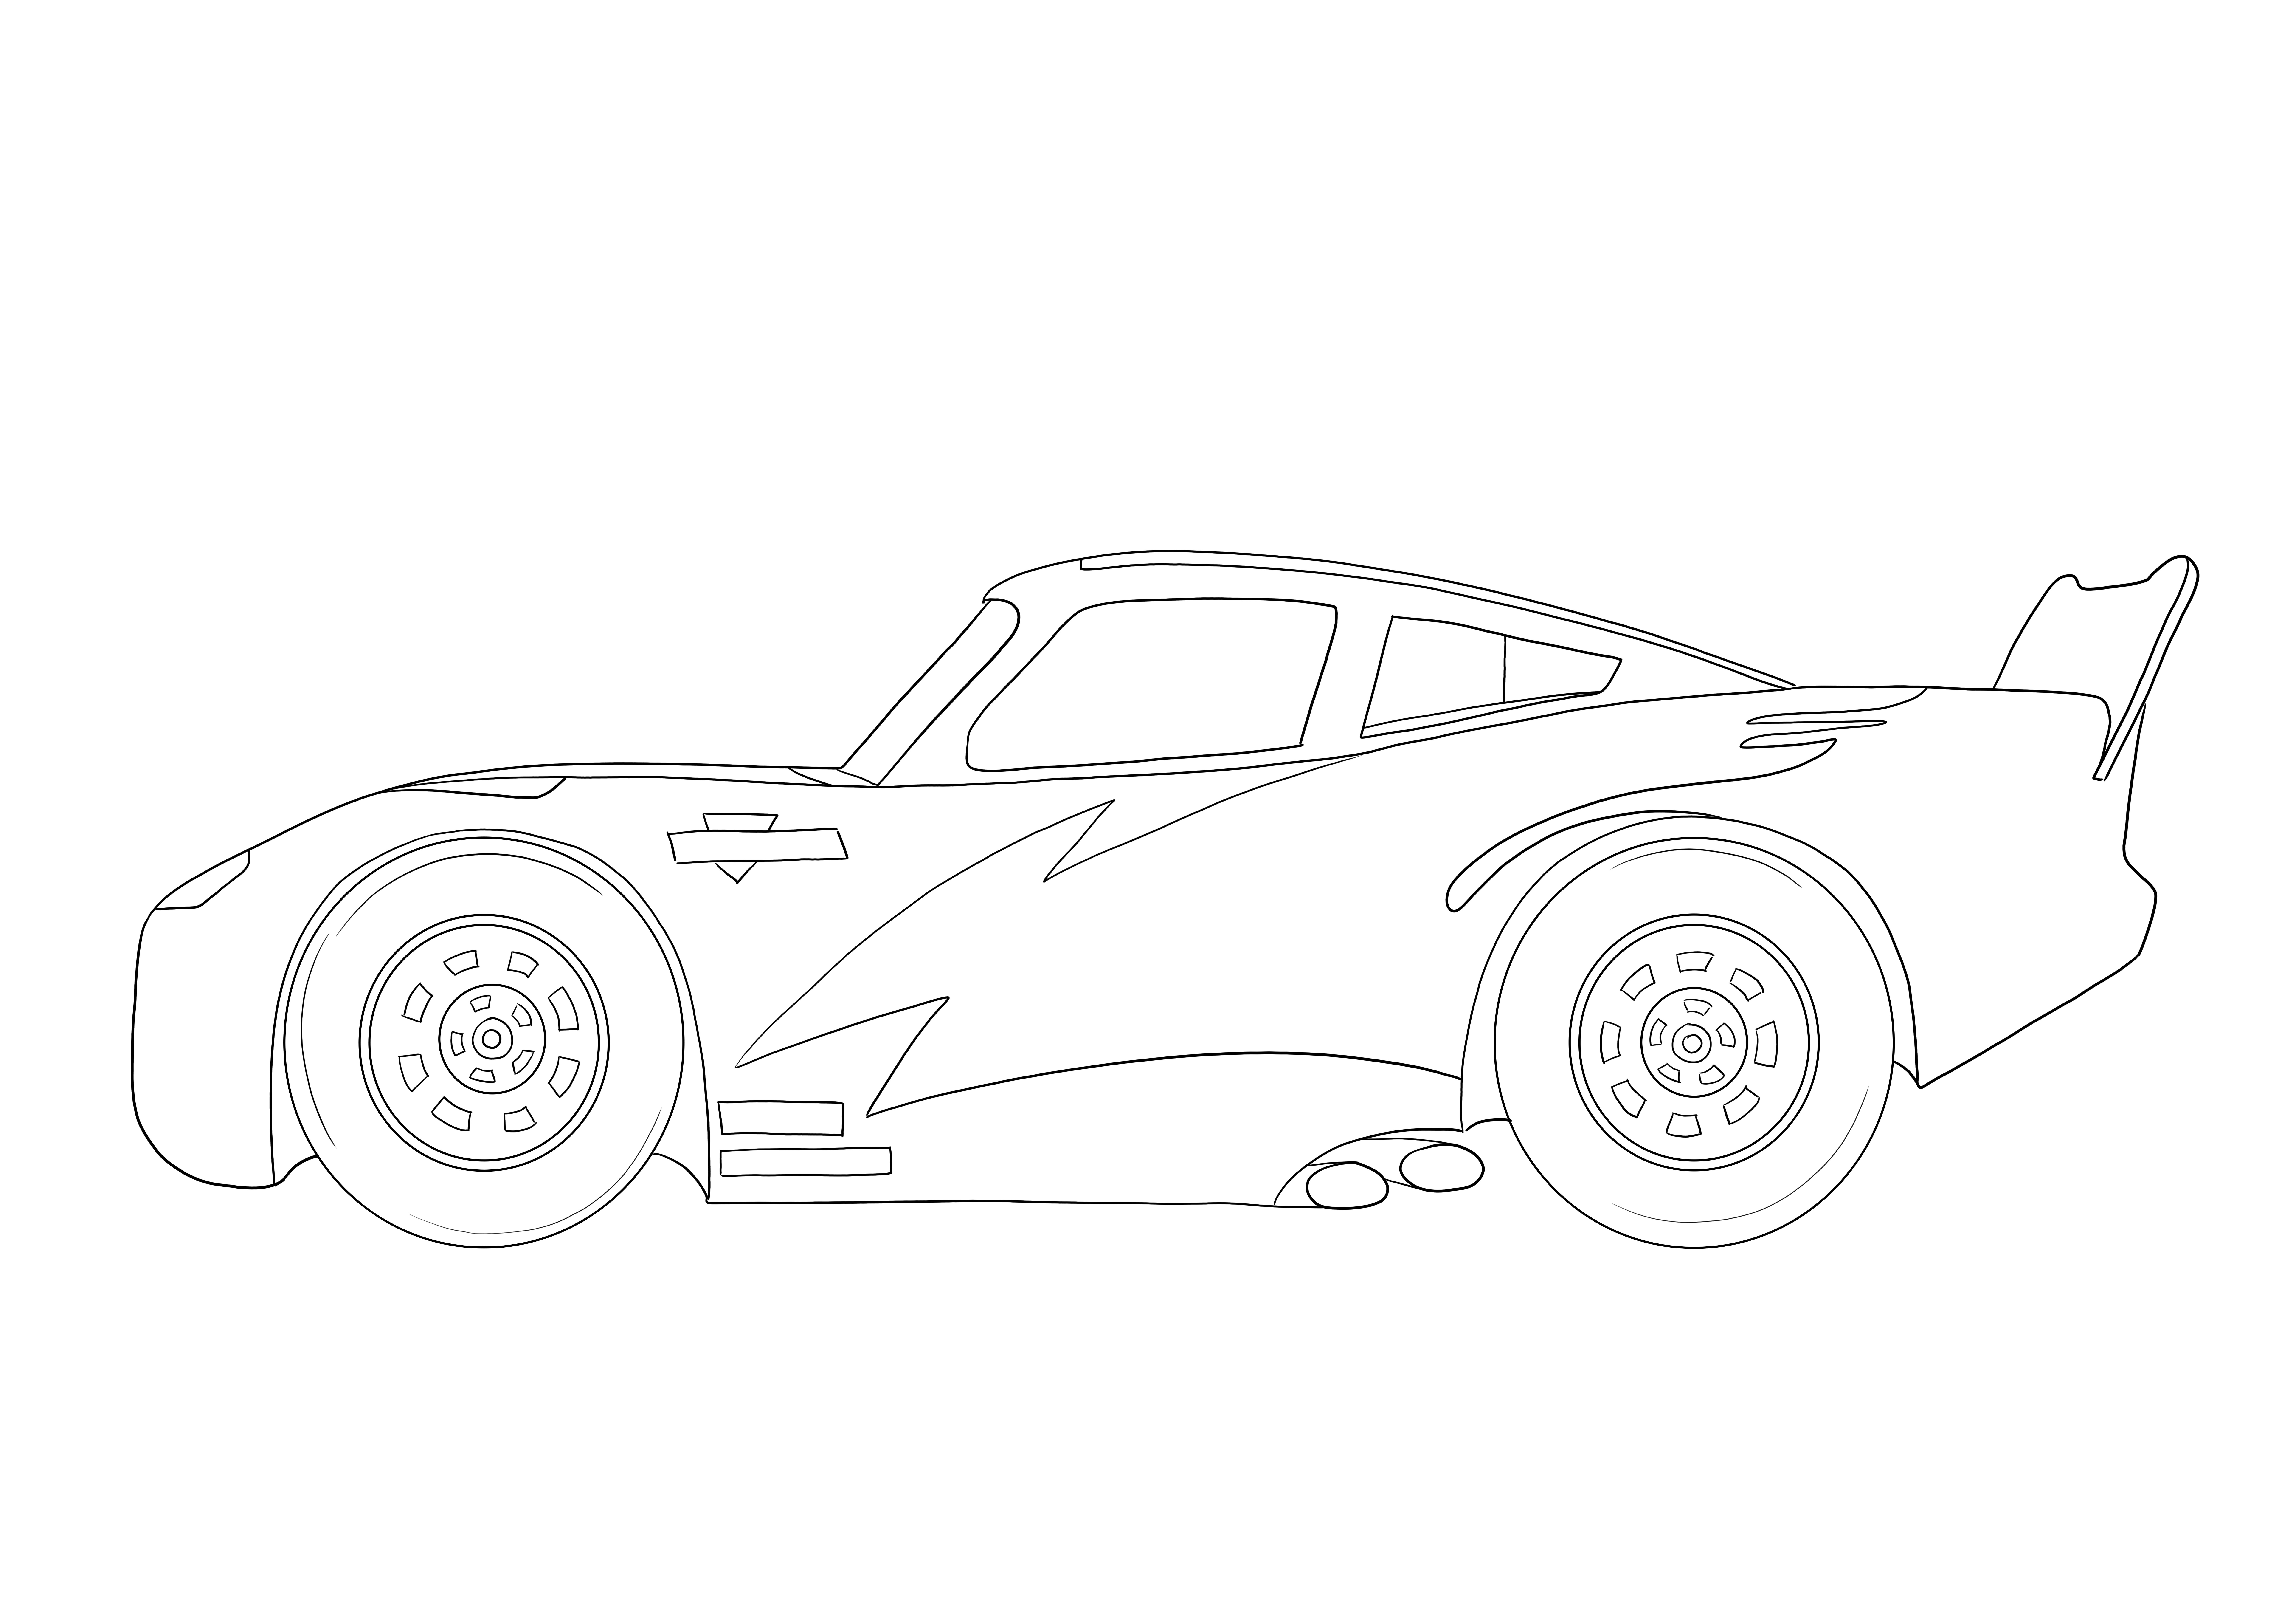 Lightning McQueen from Cars 3 coloring page free to download and color